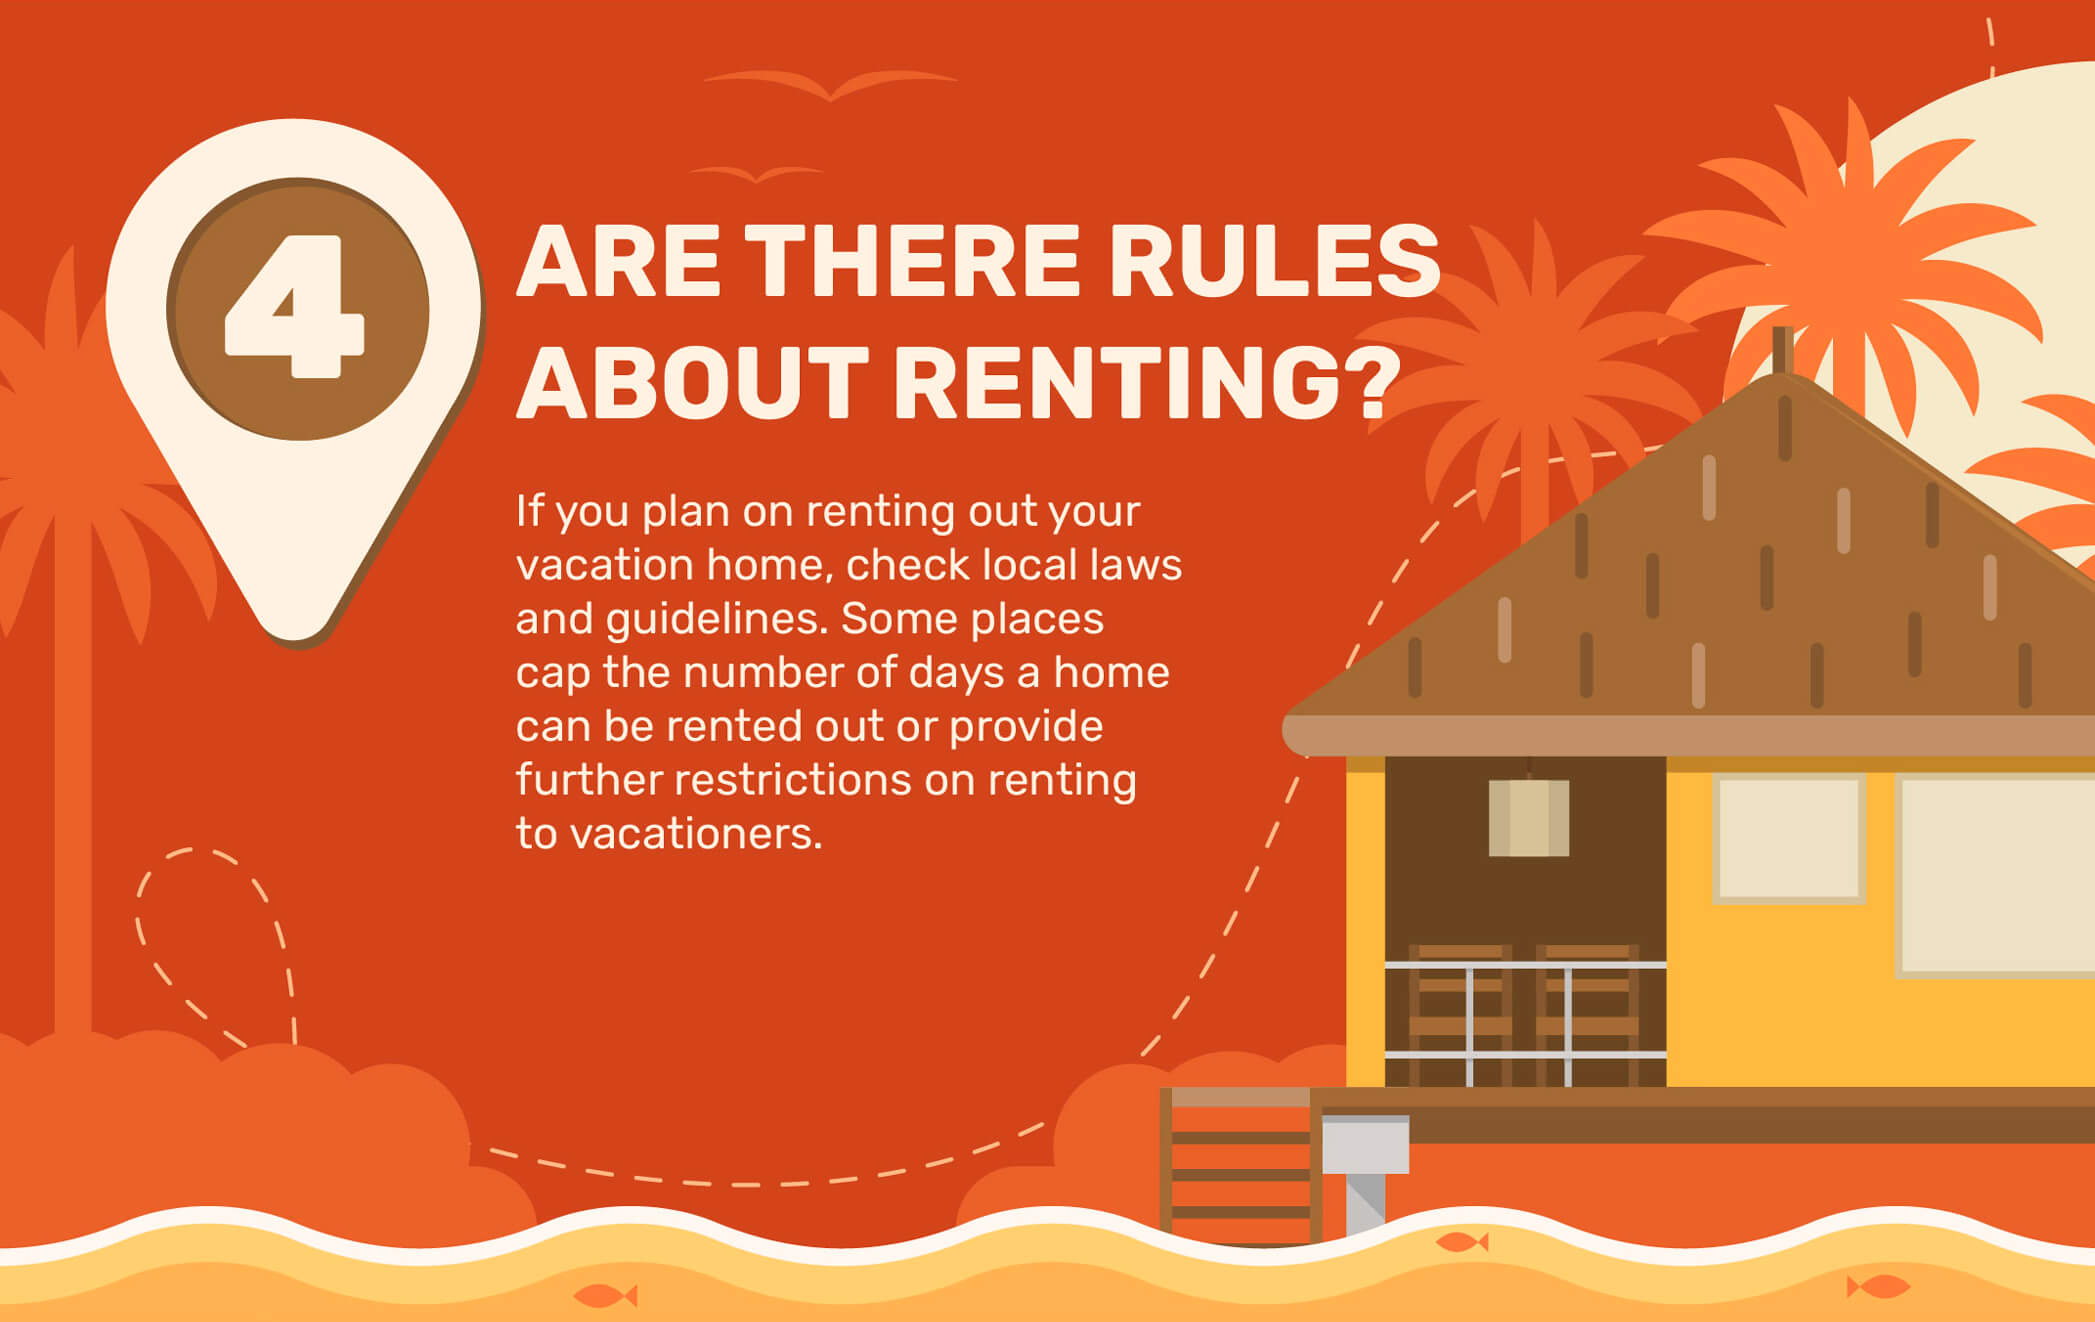 4. Are There Rules About Renting? If you plan on renting out your vacation home, check local laws and guidelines. Some places cap the number of days a home can be rented out or provide further restrictions on renting to vacationers.